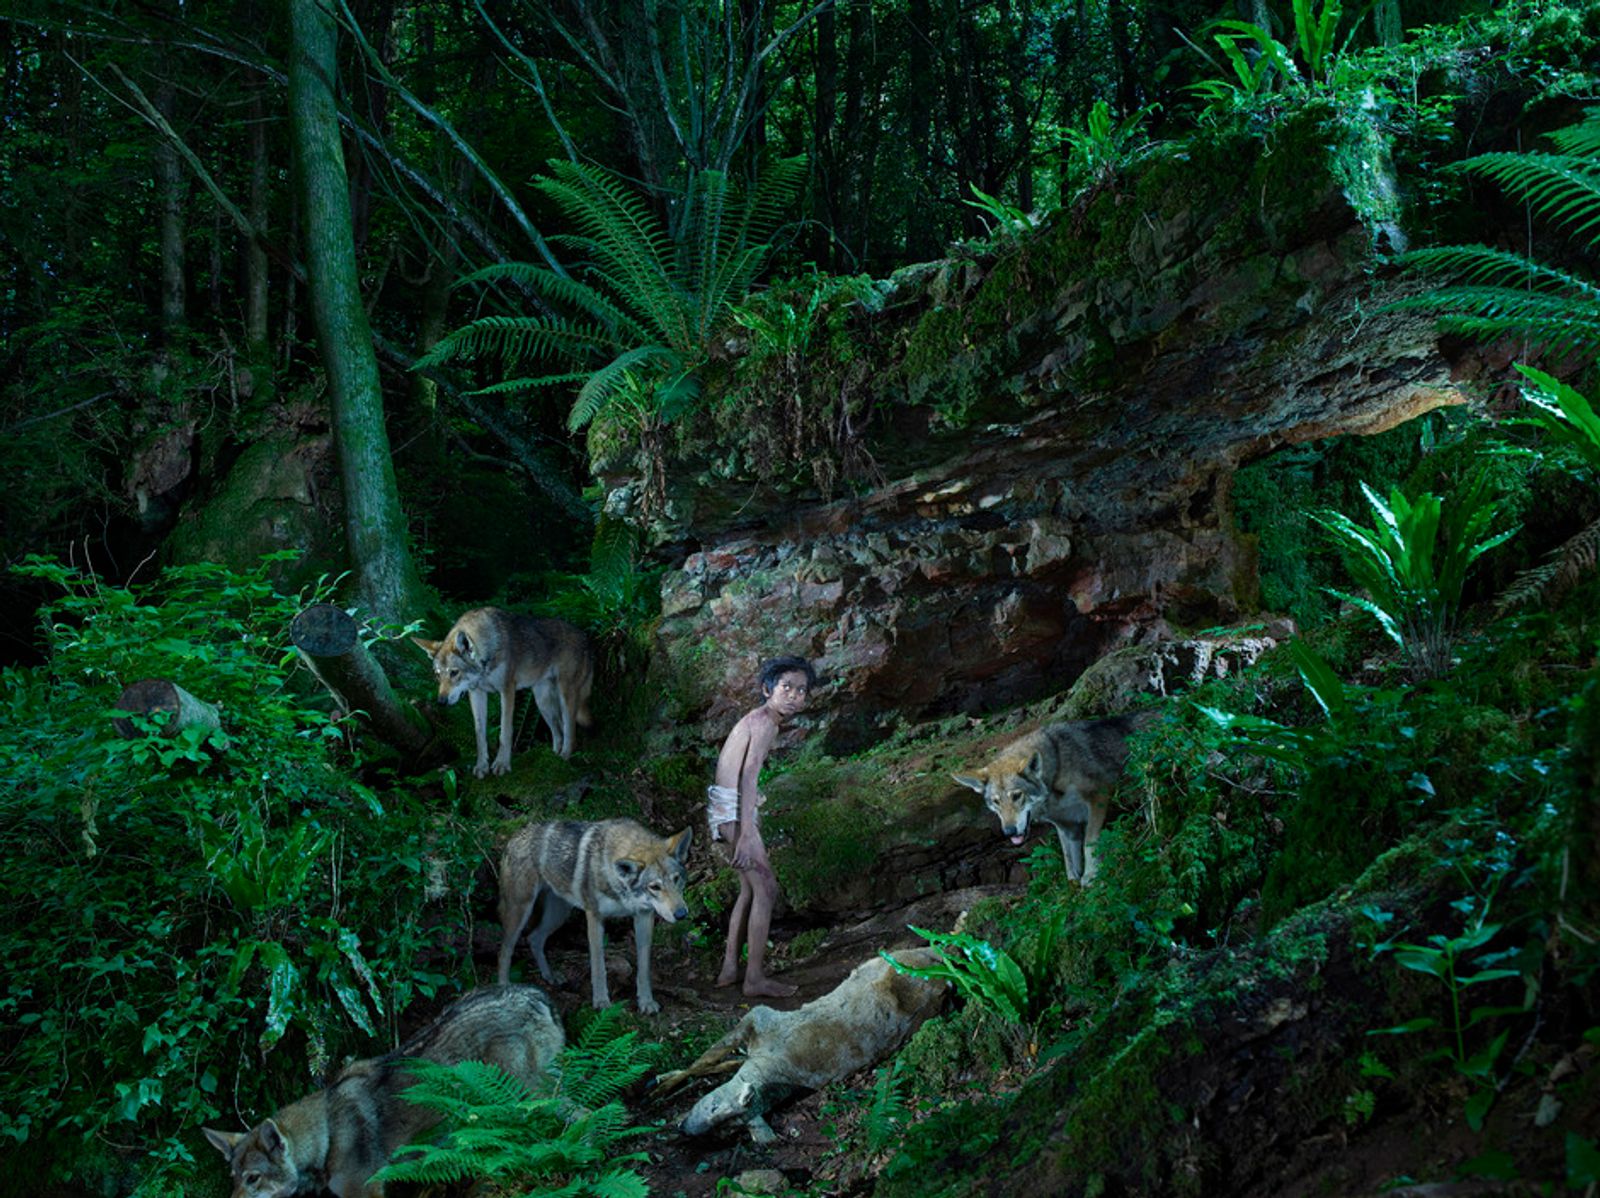 © Julia Fullerton-batten - Image from the Feral Children photography project